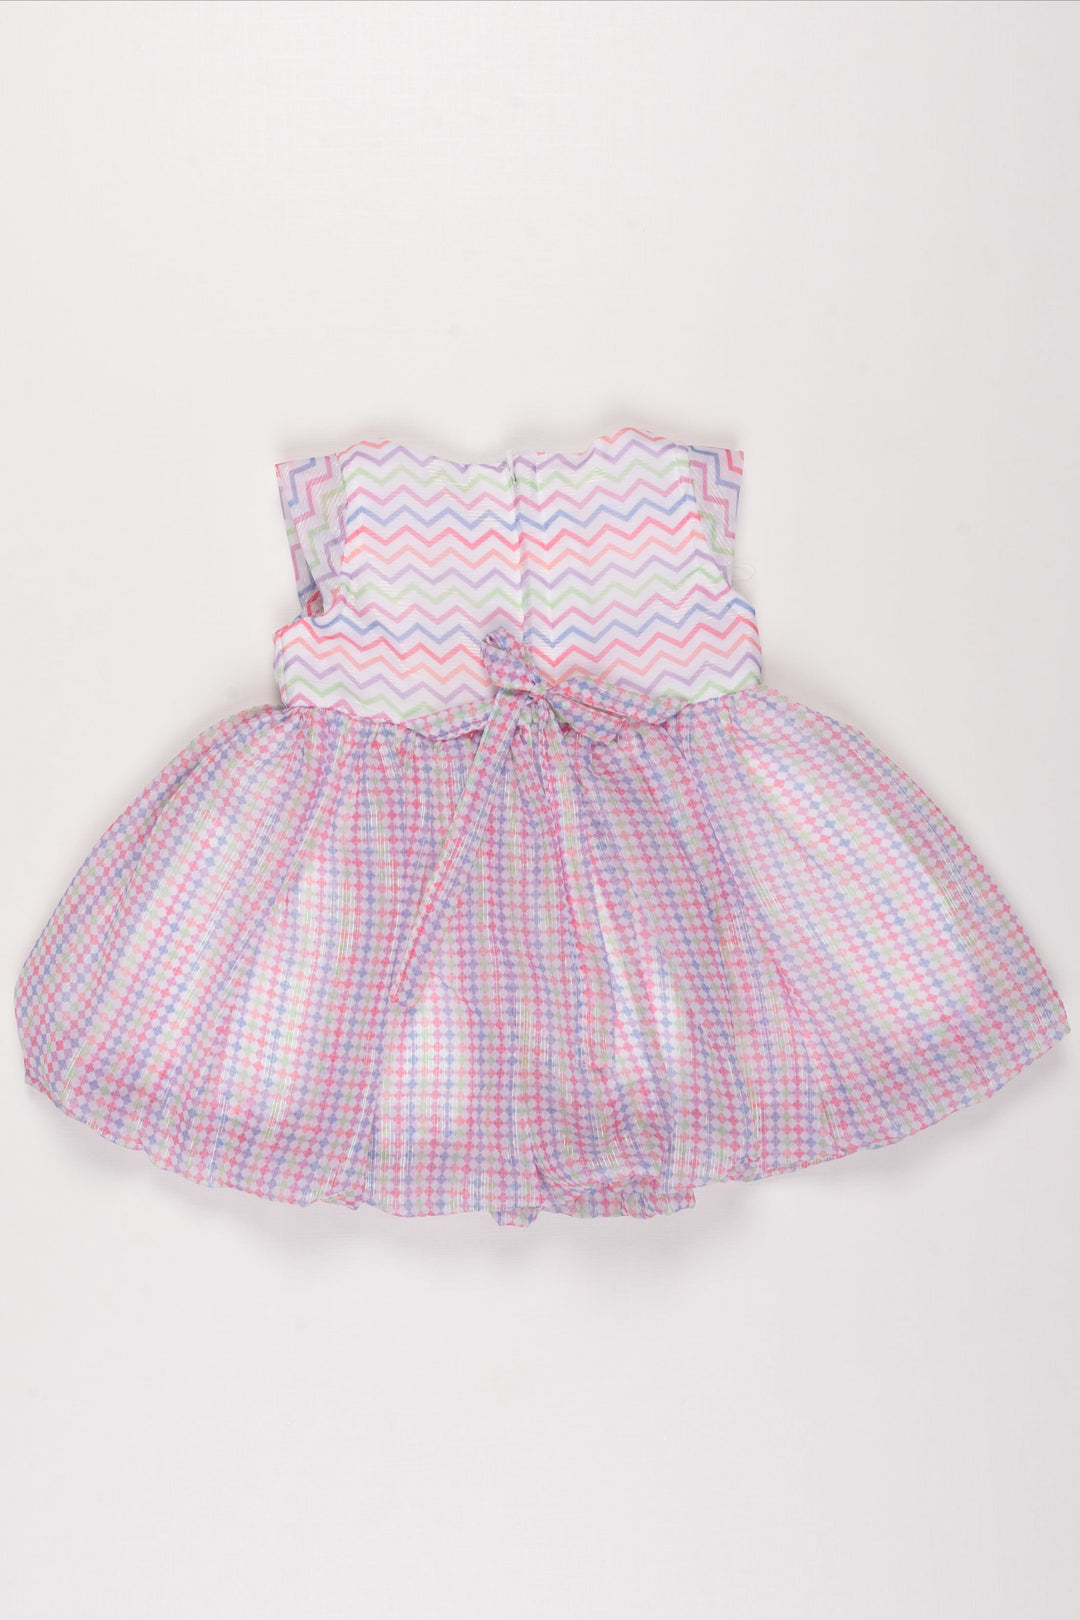 The Nesavu Baby Fancy Frock Infant Girl's Colorful Chevron and Gingham Frock with Bow Detail Nesavu 12 (3M) / multicolor BFJ505B-12 Colorful Chevron & Gingham Frock for Infants | Casual Summer Dress | The Nesavu